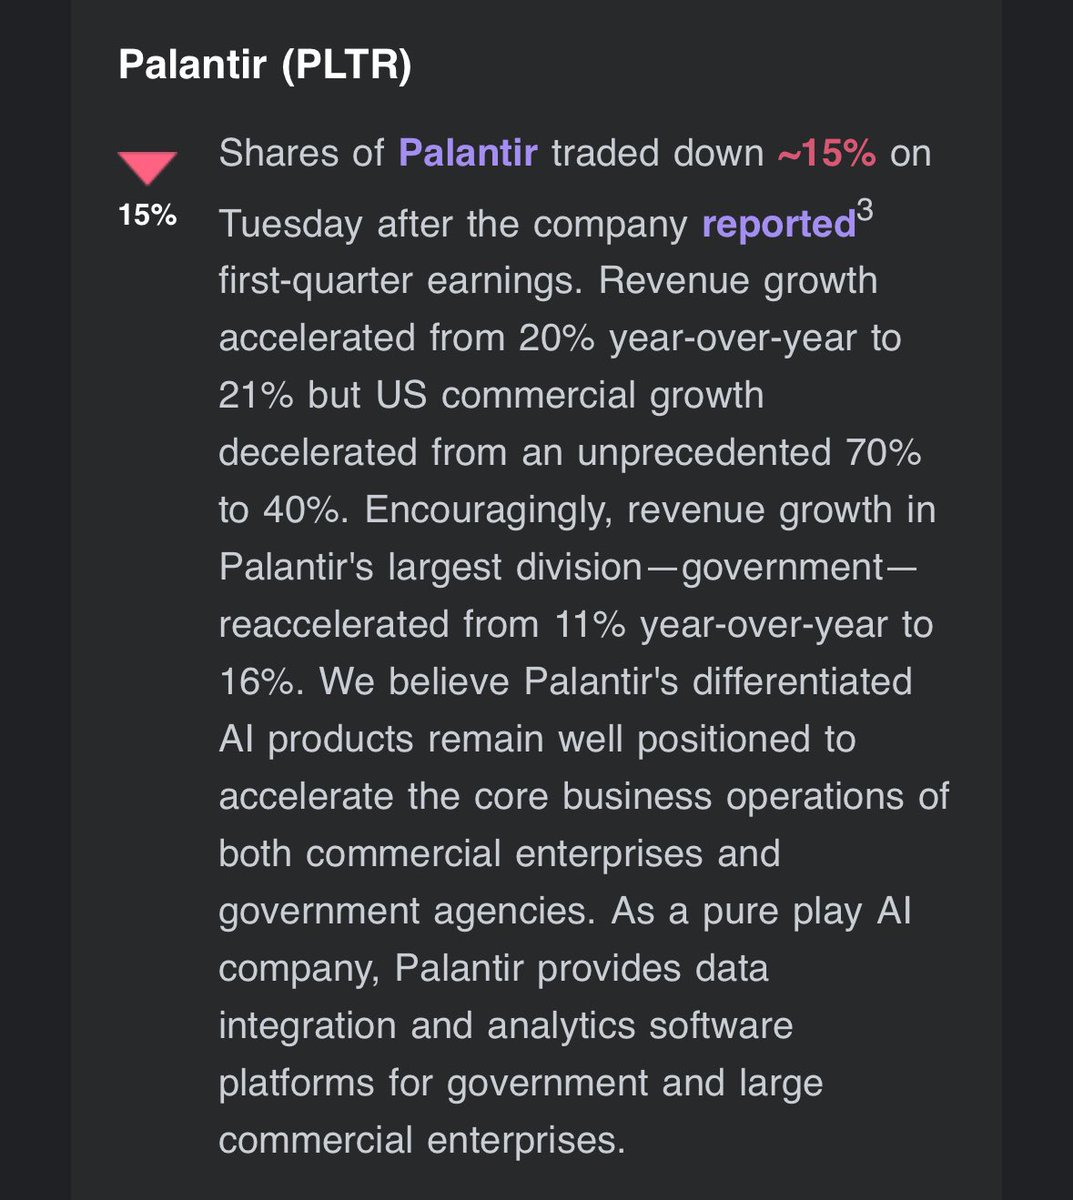 Cathie Wood and Ark Invest just said this about Palantir $PLTR

“We believe Palantir's differentiated AI products remain well positioned to accelerate the core business operations of both commercial enterprises and government agencies”